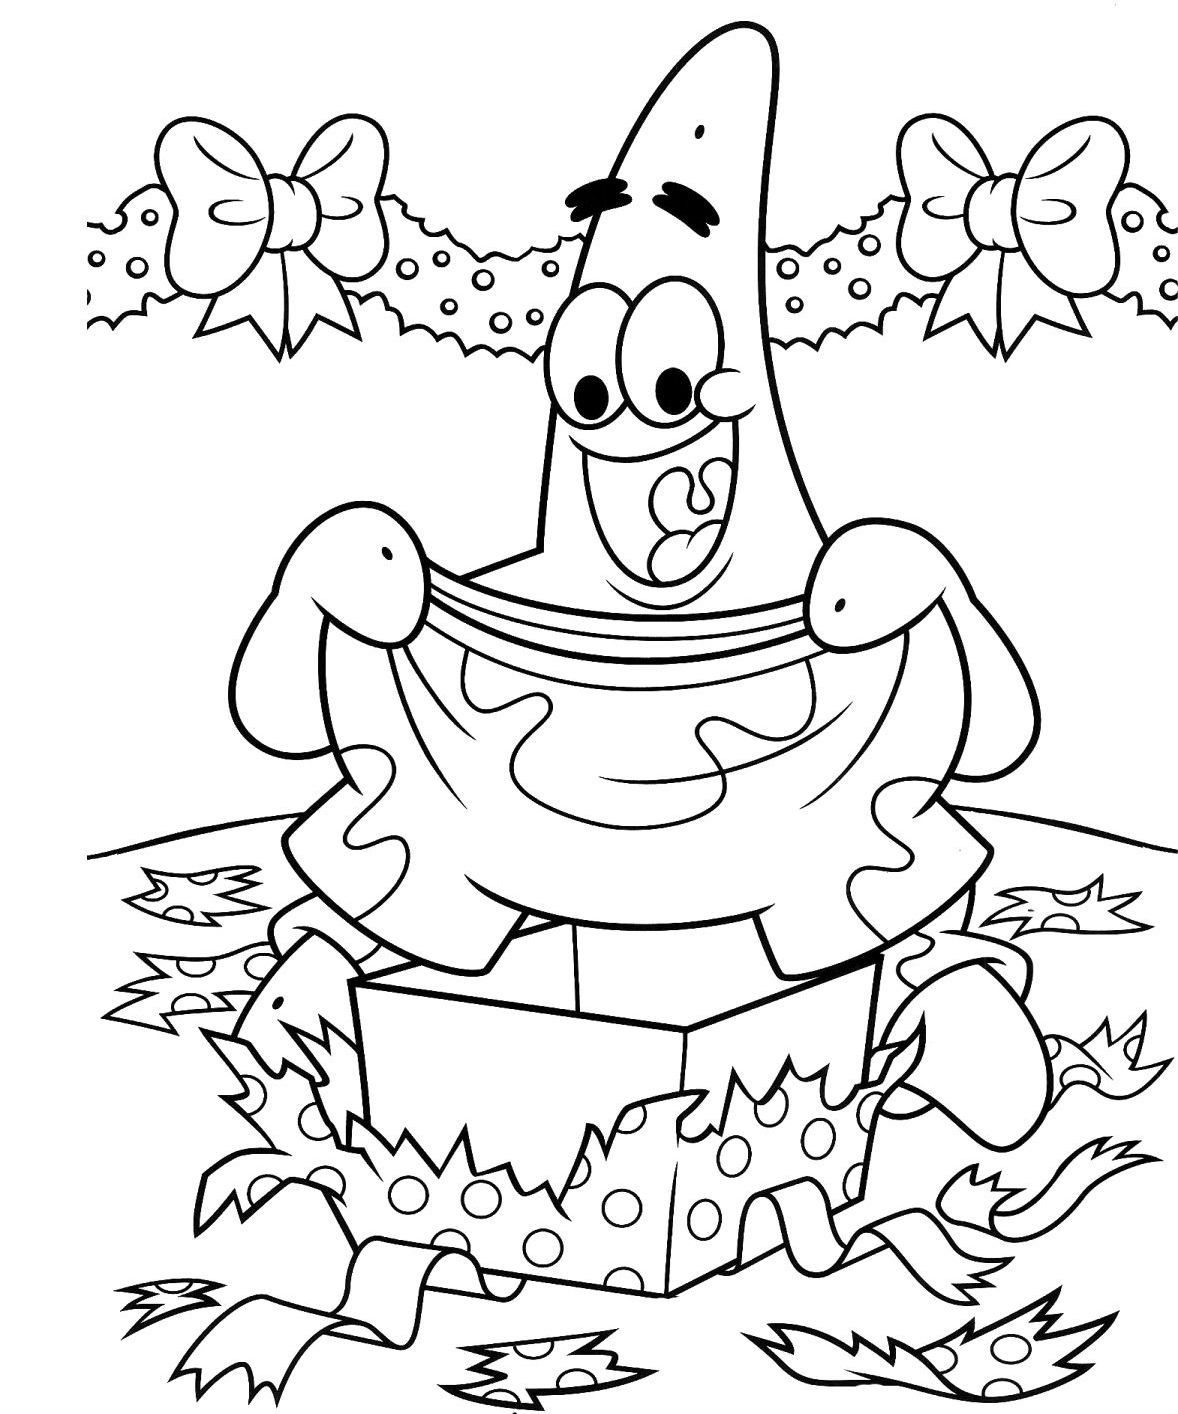 Free Spongebob Christmas Coloring Pages Free Printable Download Free 